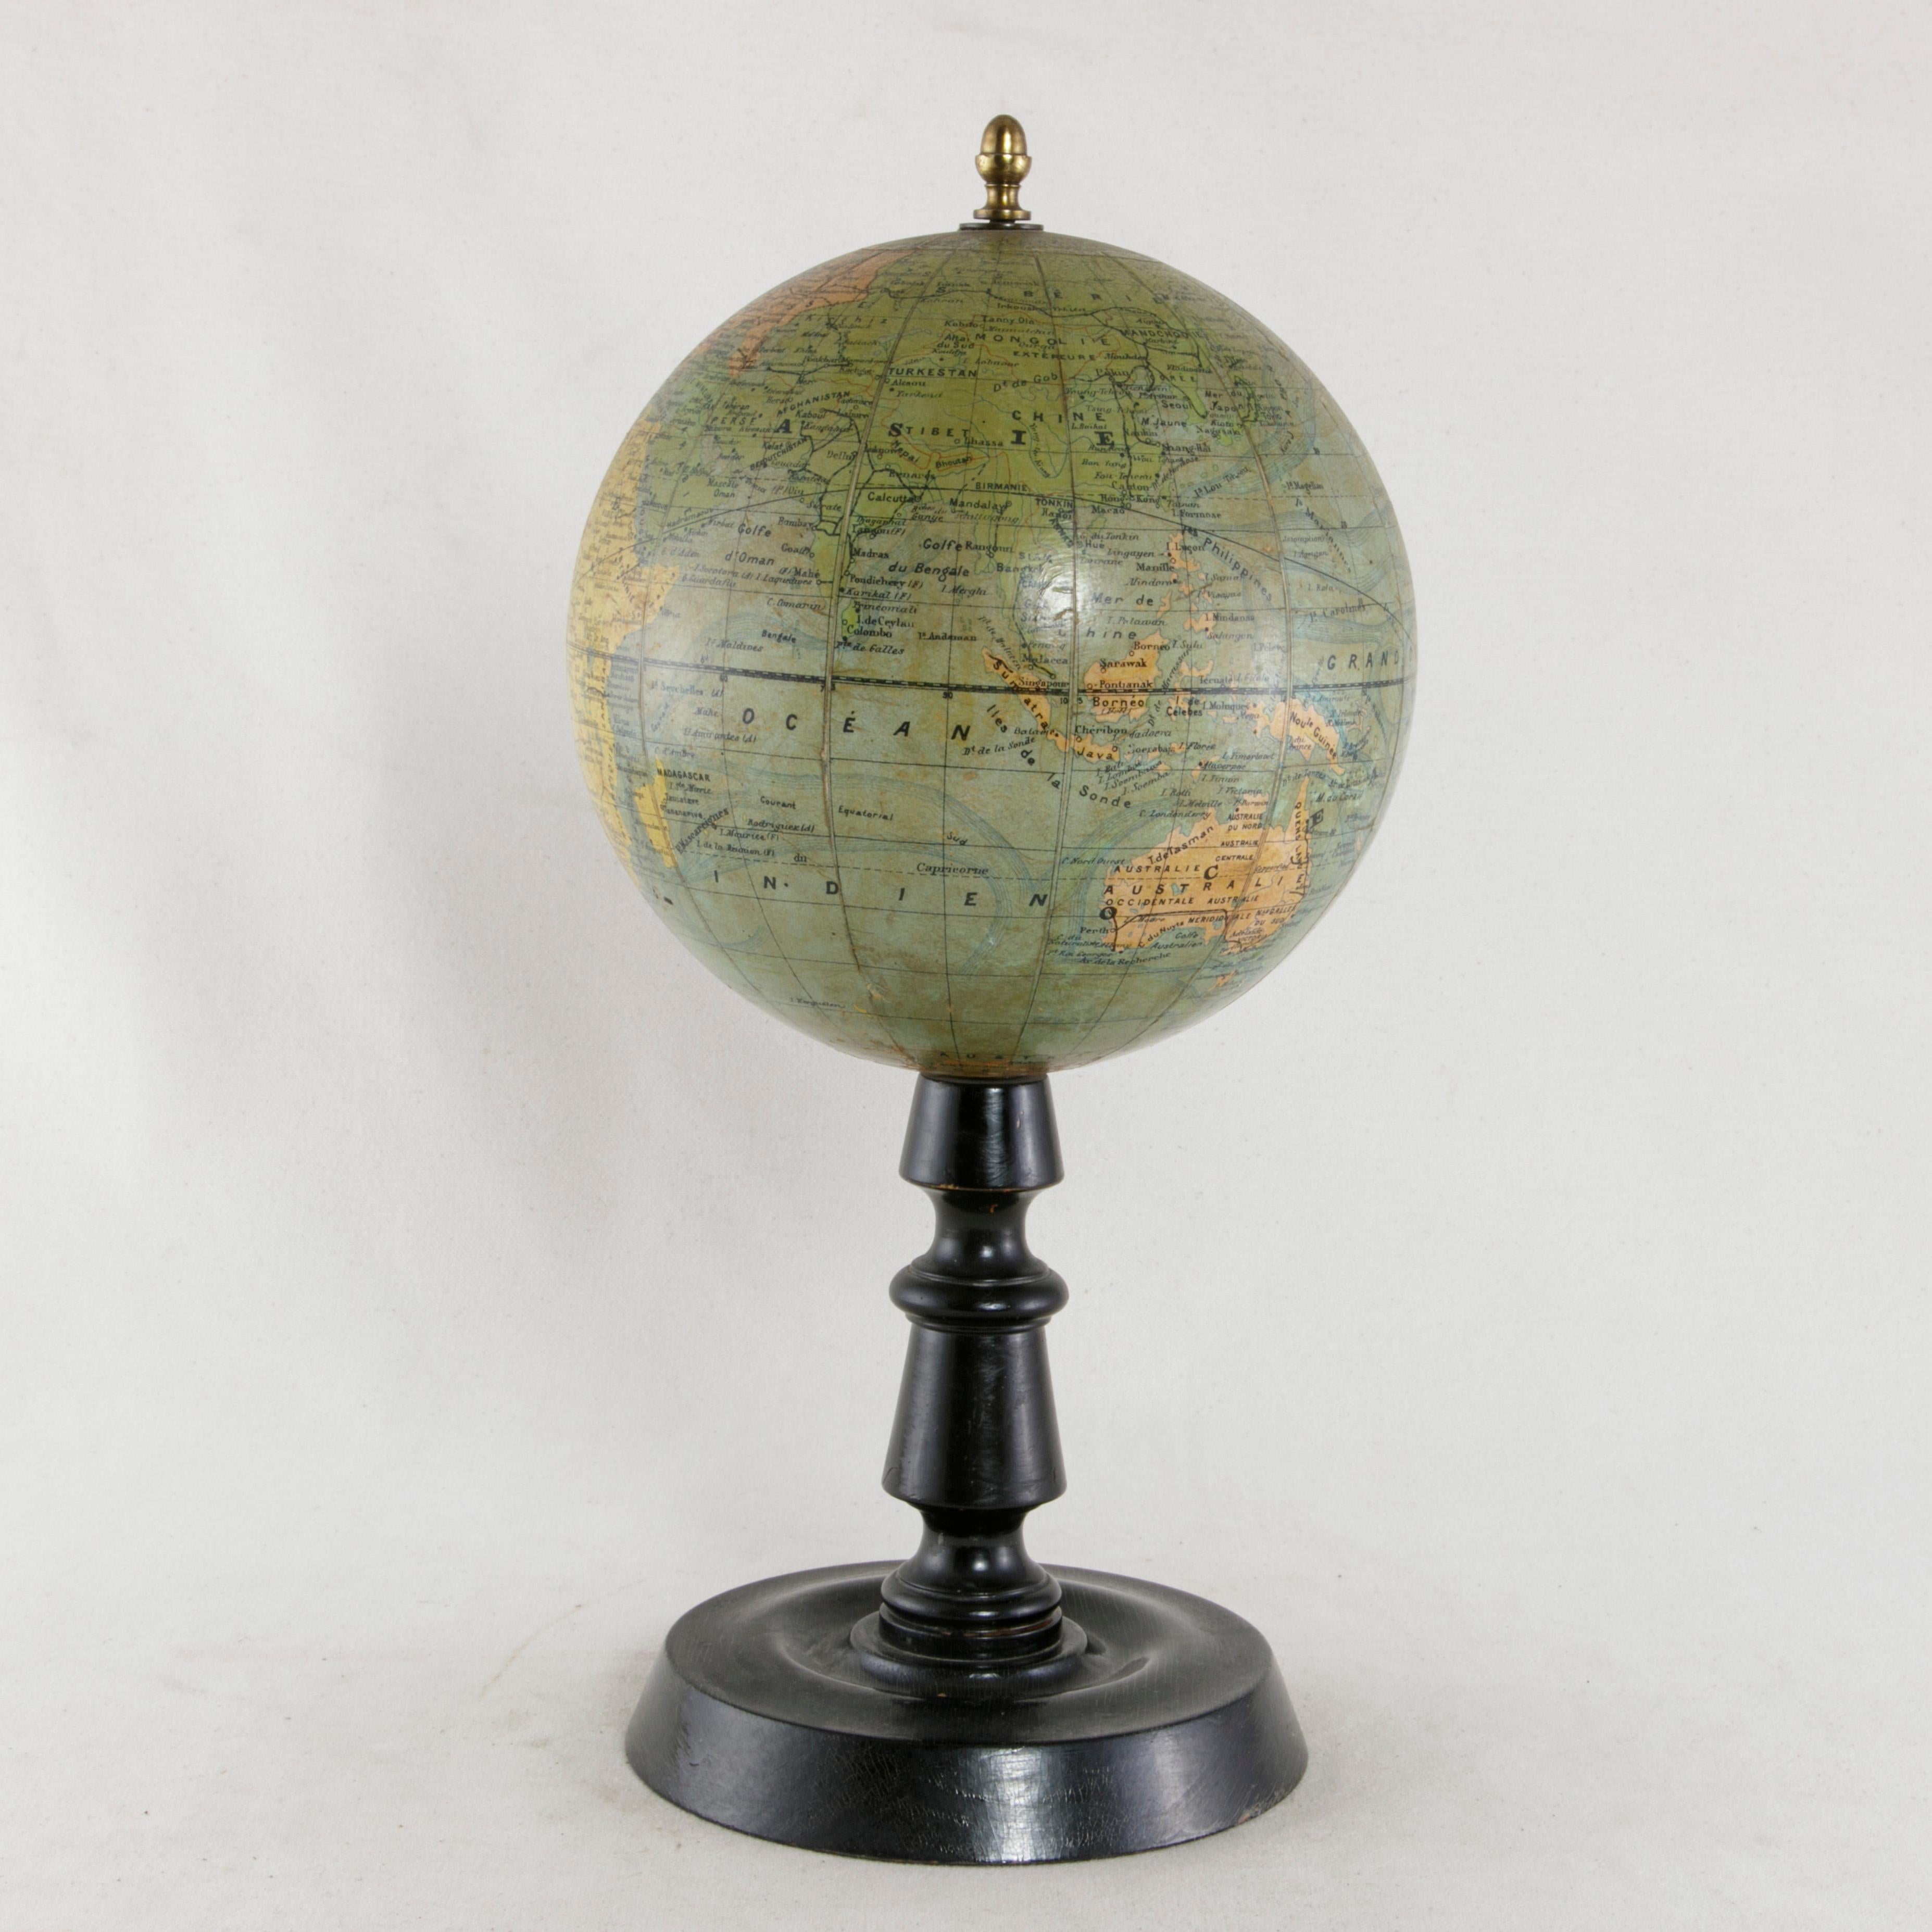 Early 20th Century French Terrestrial Globe on Ebonized Wood Base by Cartographer J. Forest